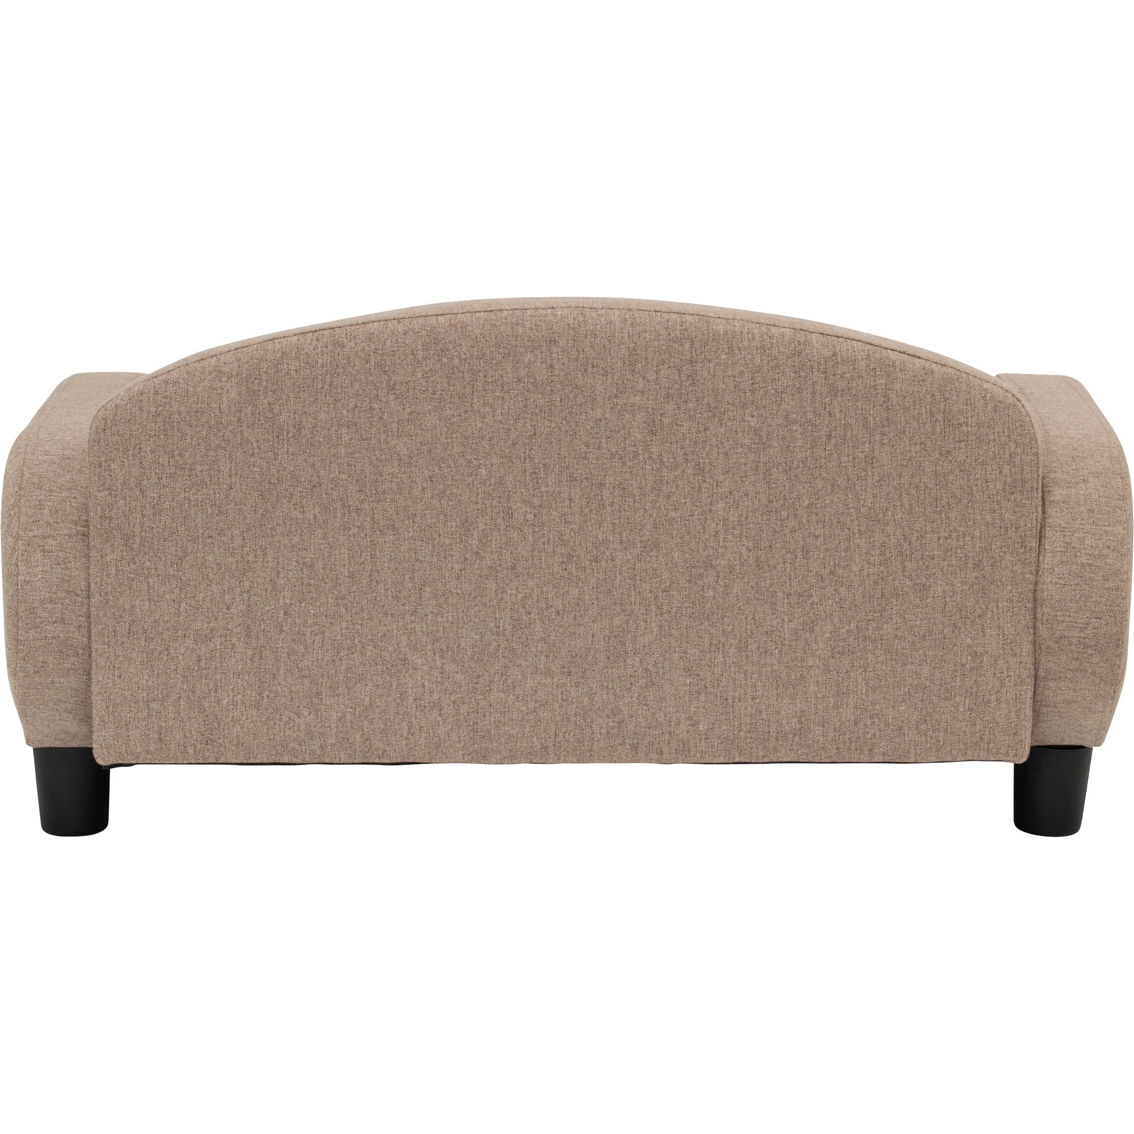 Studio Designs Paws and Purrs Pet Sofa Small - Image 5 of 9